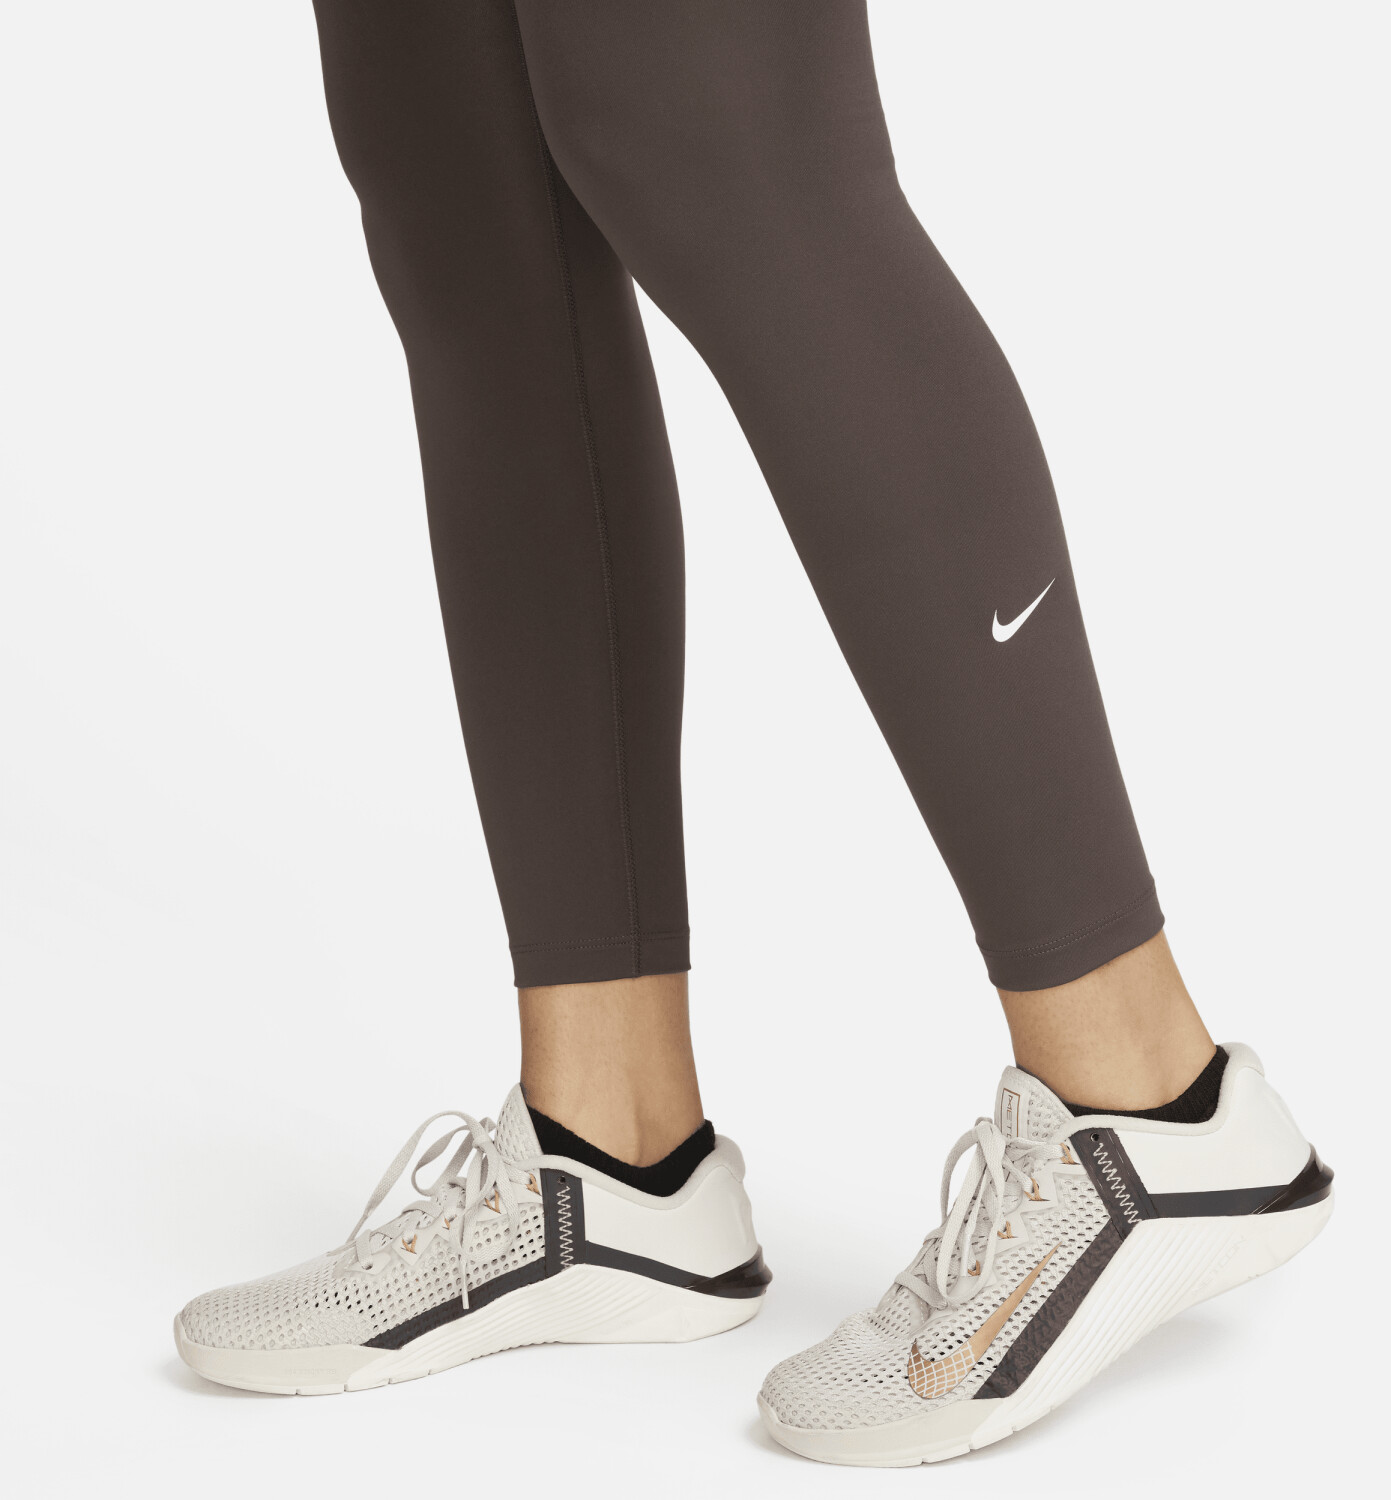 Buy Nike One Women's High-Rise Leggings (DM7278) baroque brown/white from  £44.99 (Today) – Best Deals on